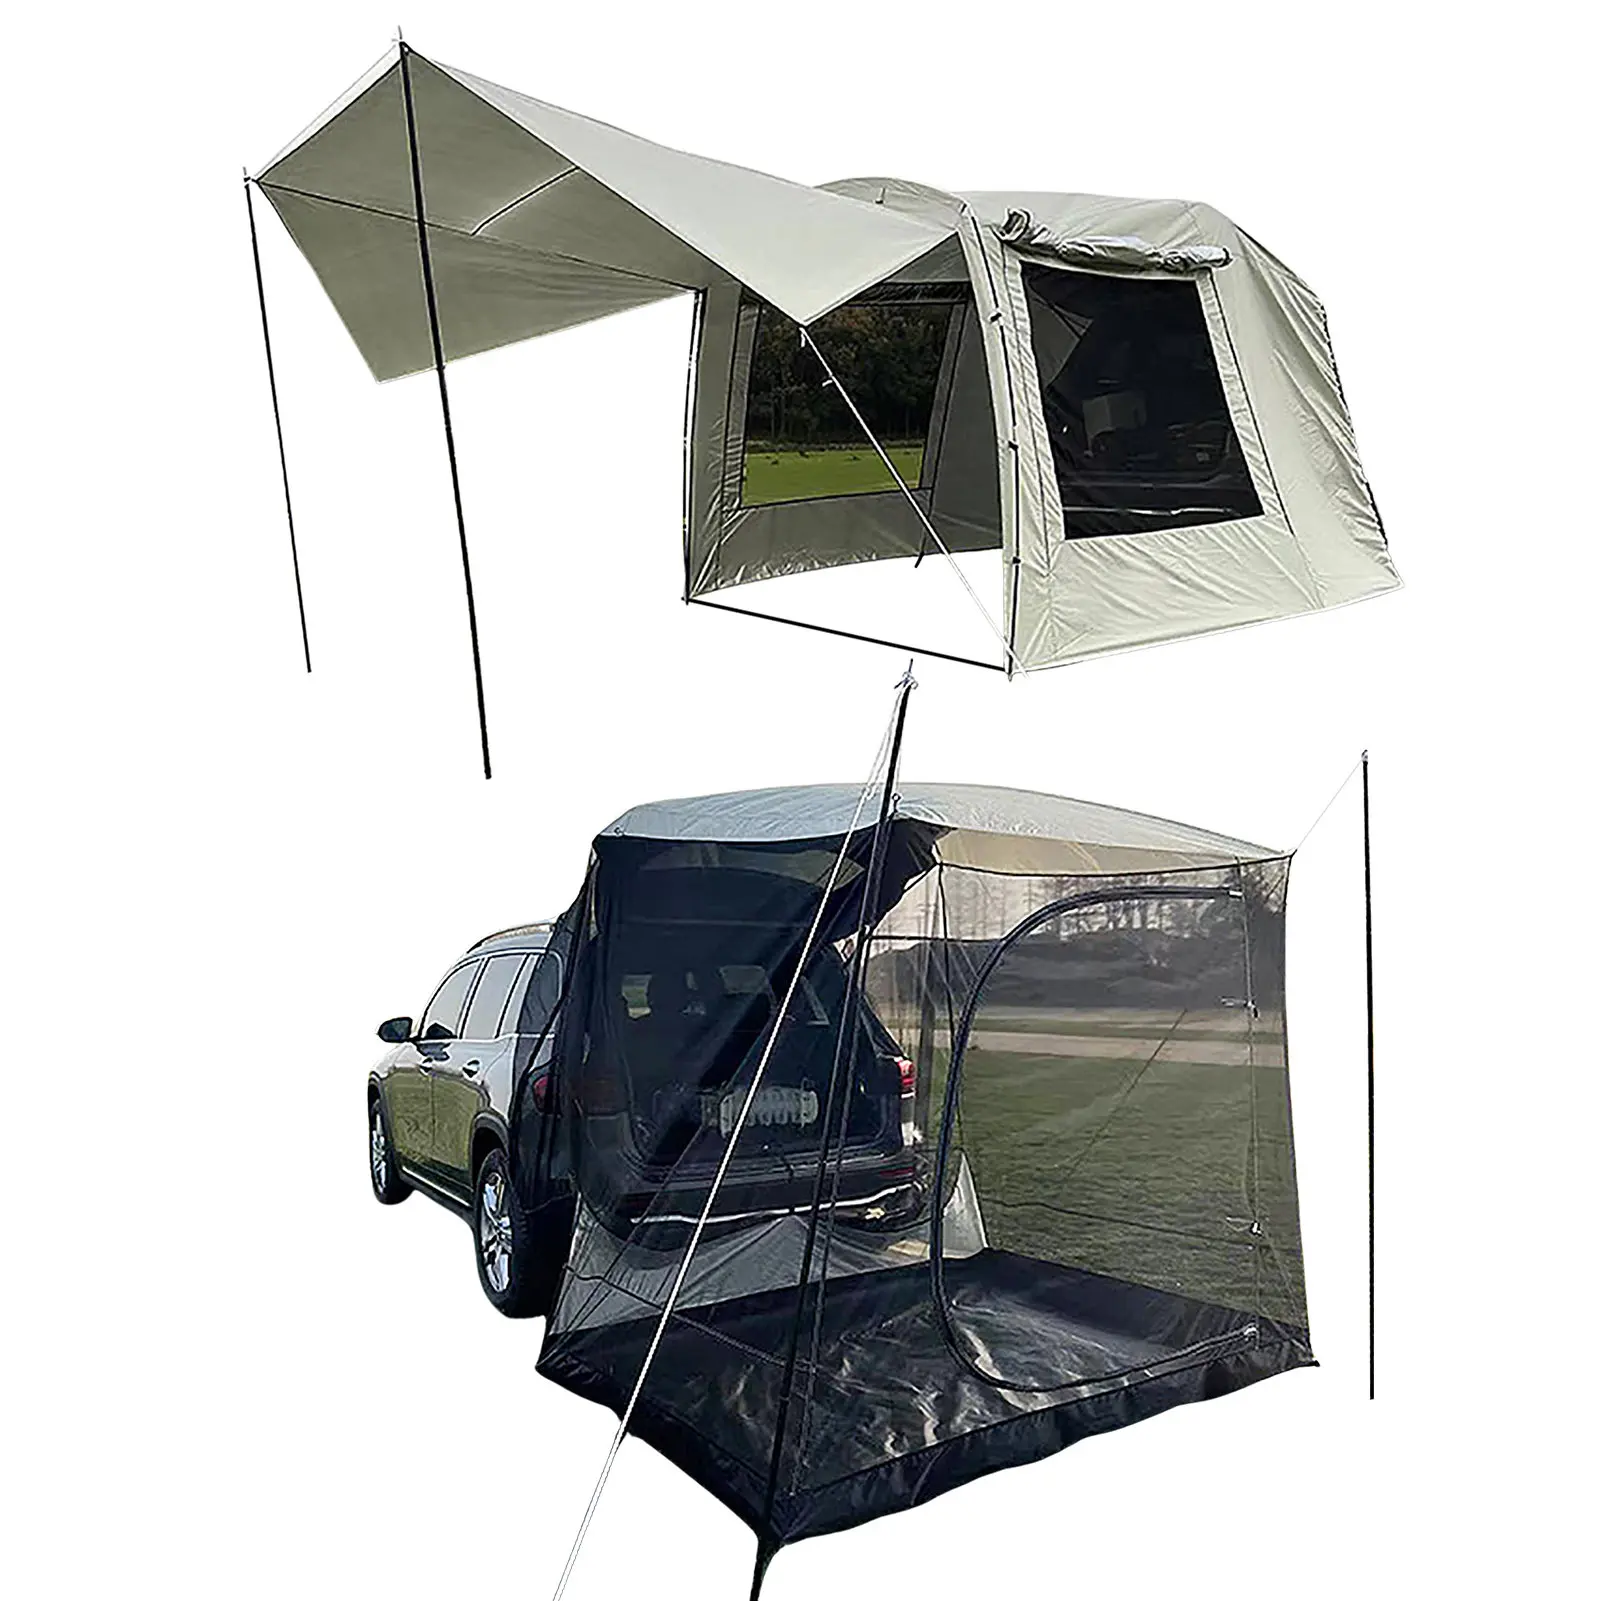 Universal SUV Camping Tent Car Tailgate Shade Awning Tent For Camping Tent Travel Large Shade Space For 5-6 Person